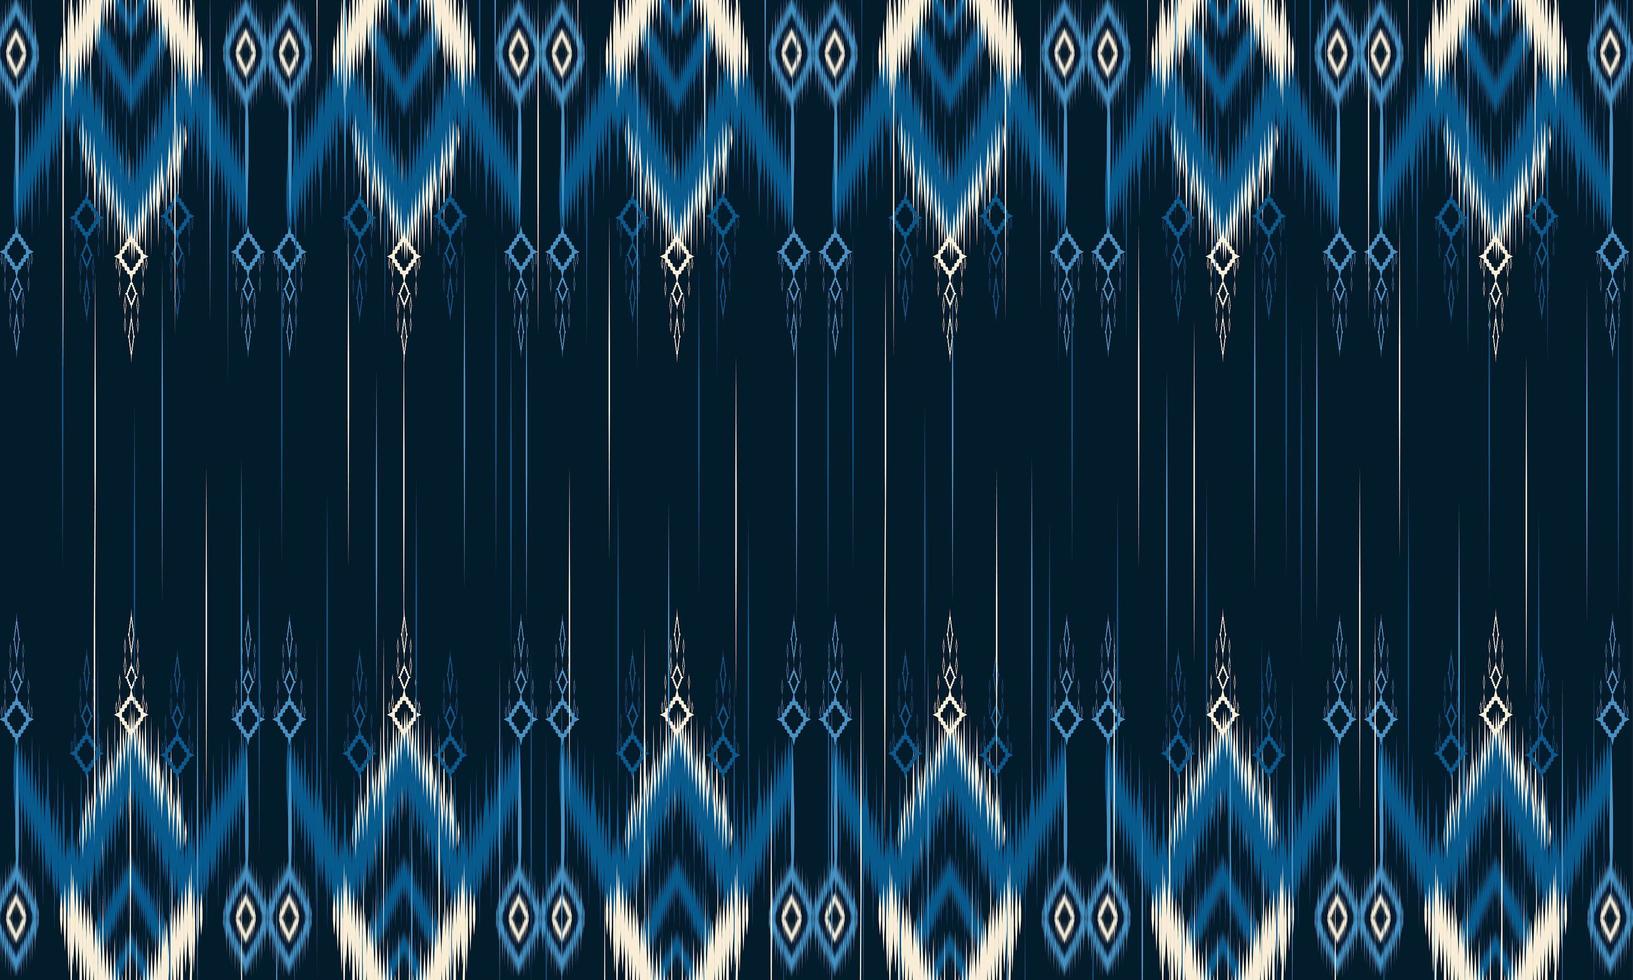 Geometric ethnic oriental ikat pattern traditional Design for background,carpet,wallpaper,clothing,wrapping,Batik,fabric,Vector illustration.embroidery style. vector